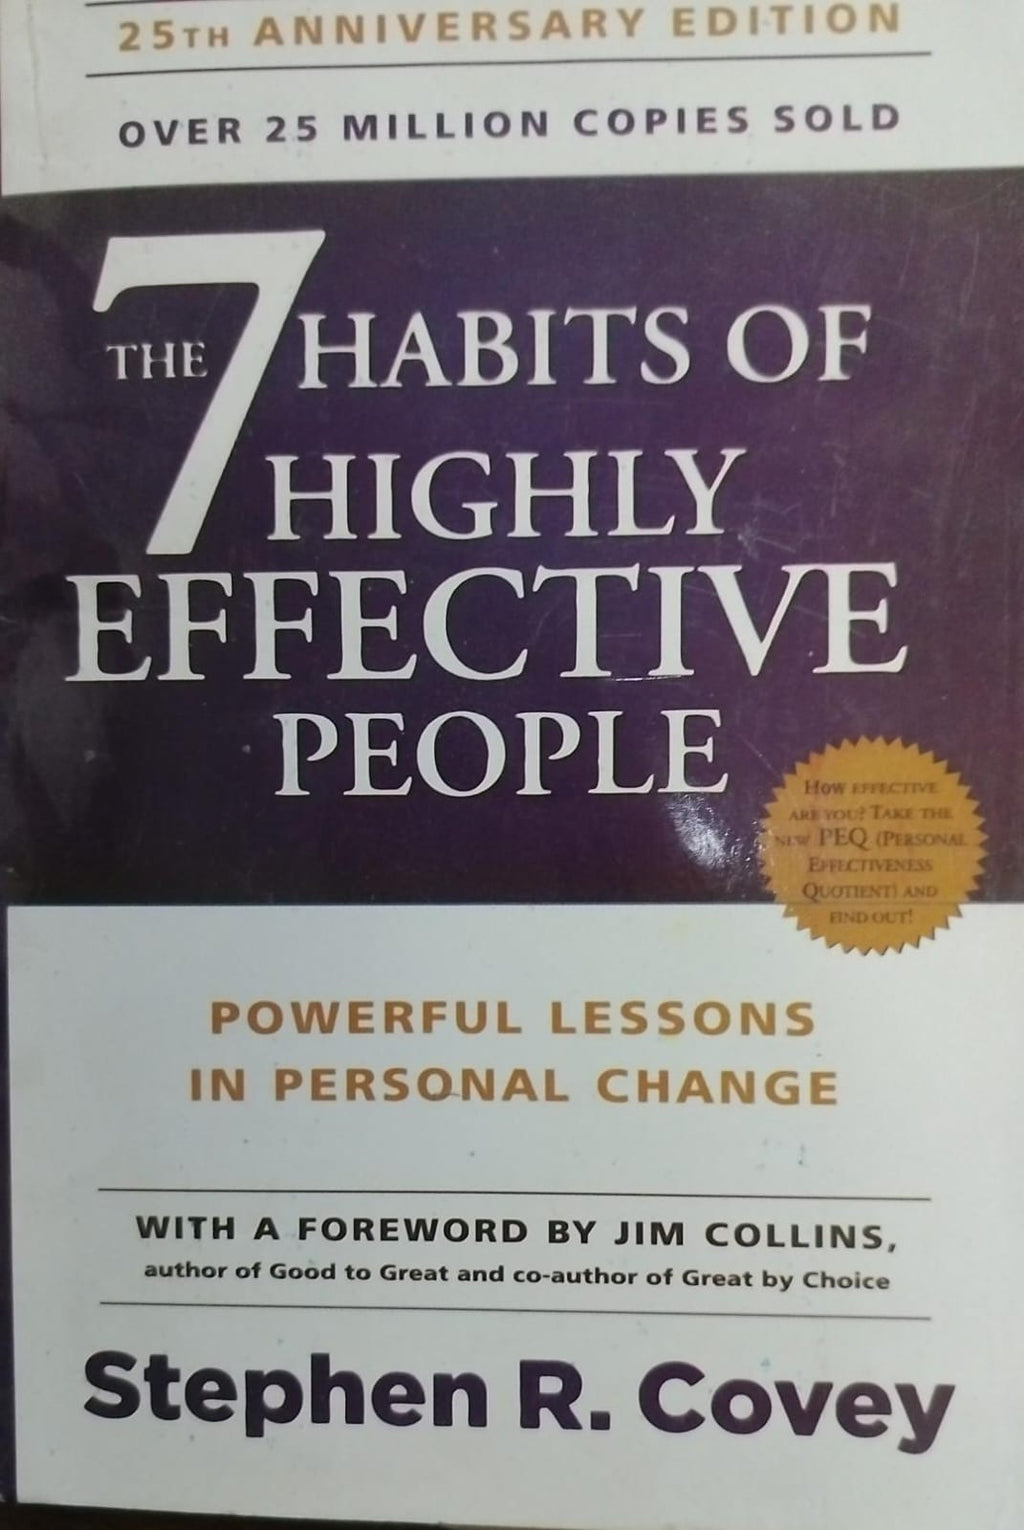 (Used) The 7 Habits of Highly Effective People (Papercover)